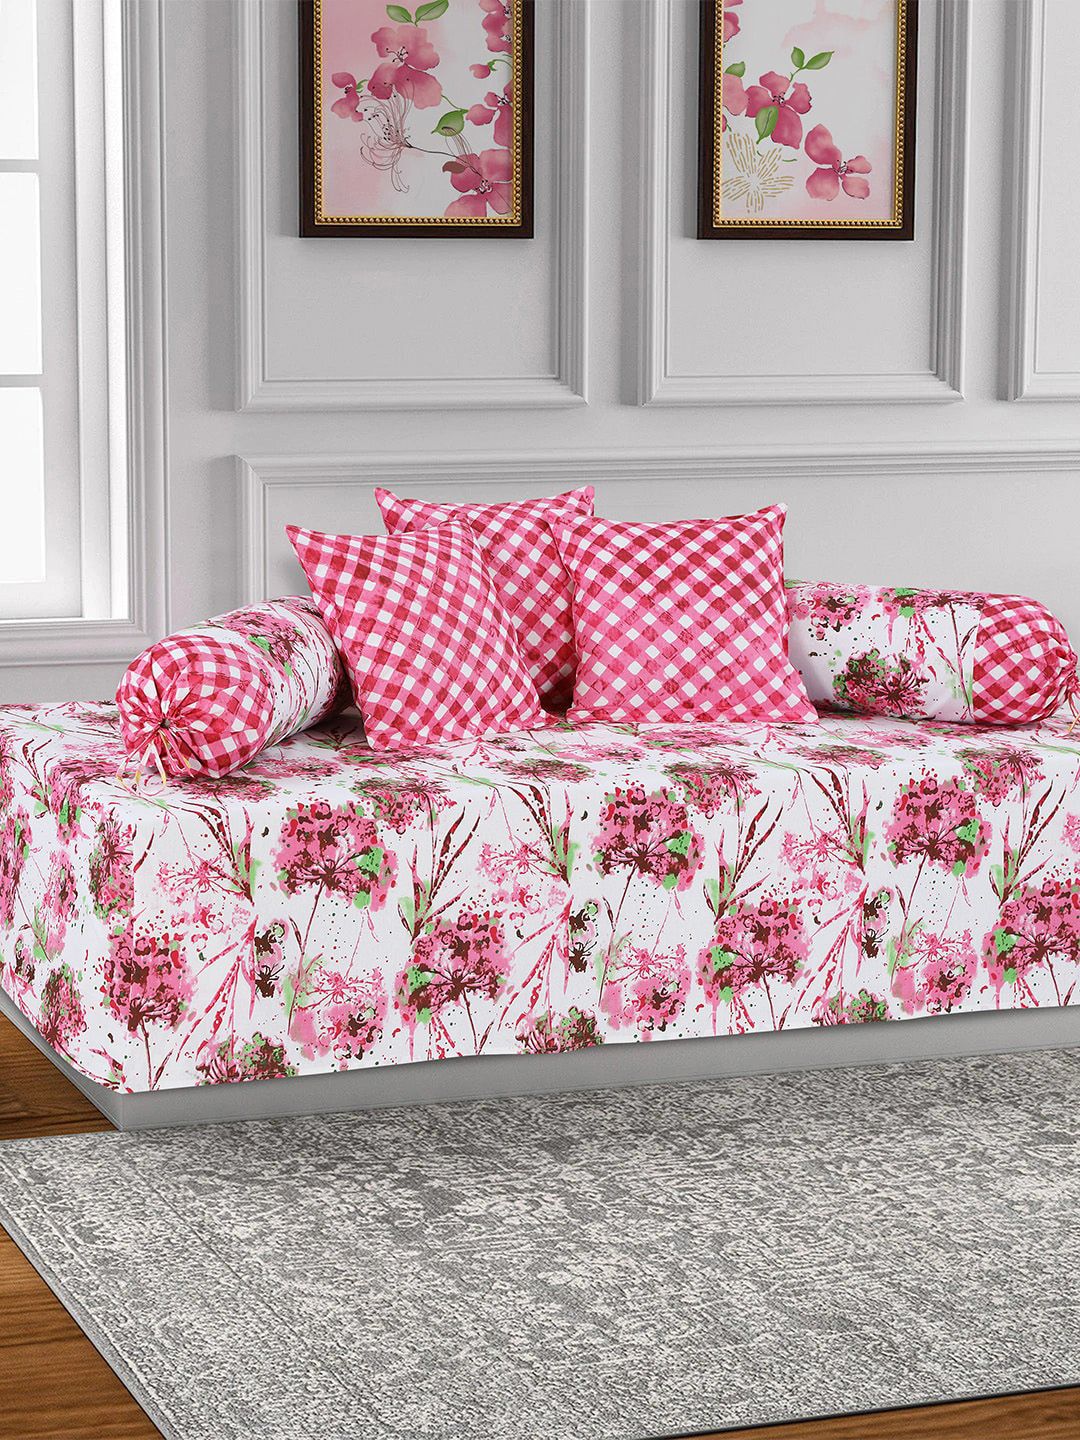 Salona Bichona Set Of 6 Pink & White Floral Bedsheet With Bolster & Cushion Covers Price in India